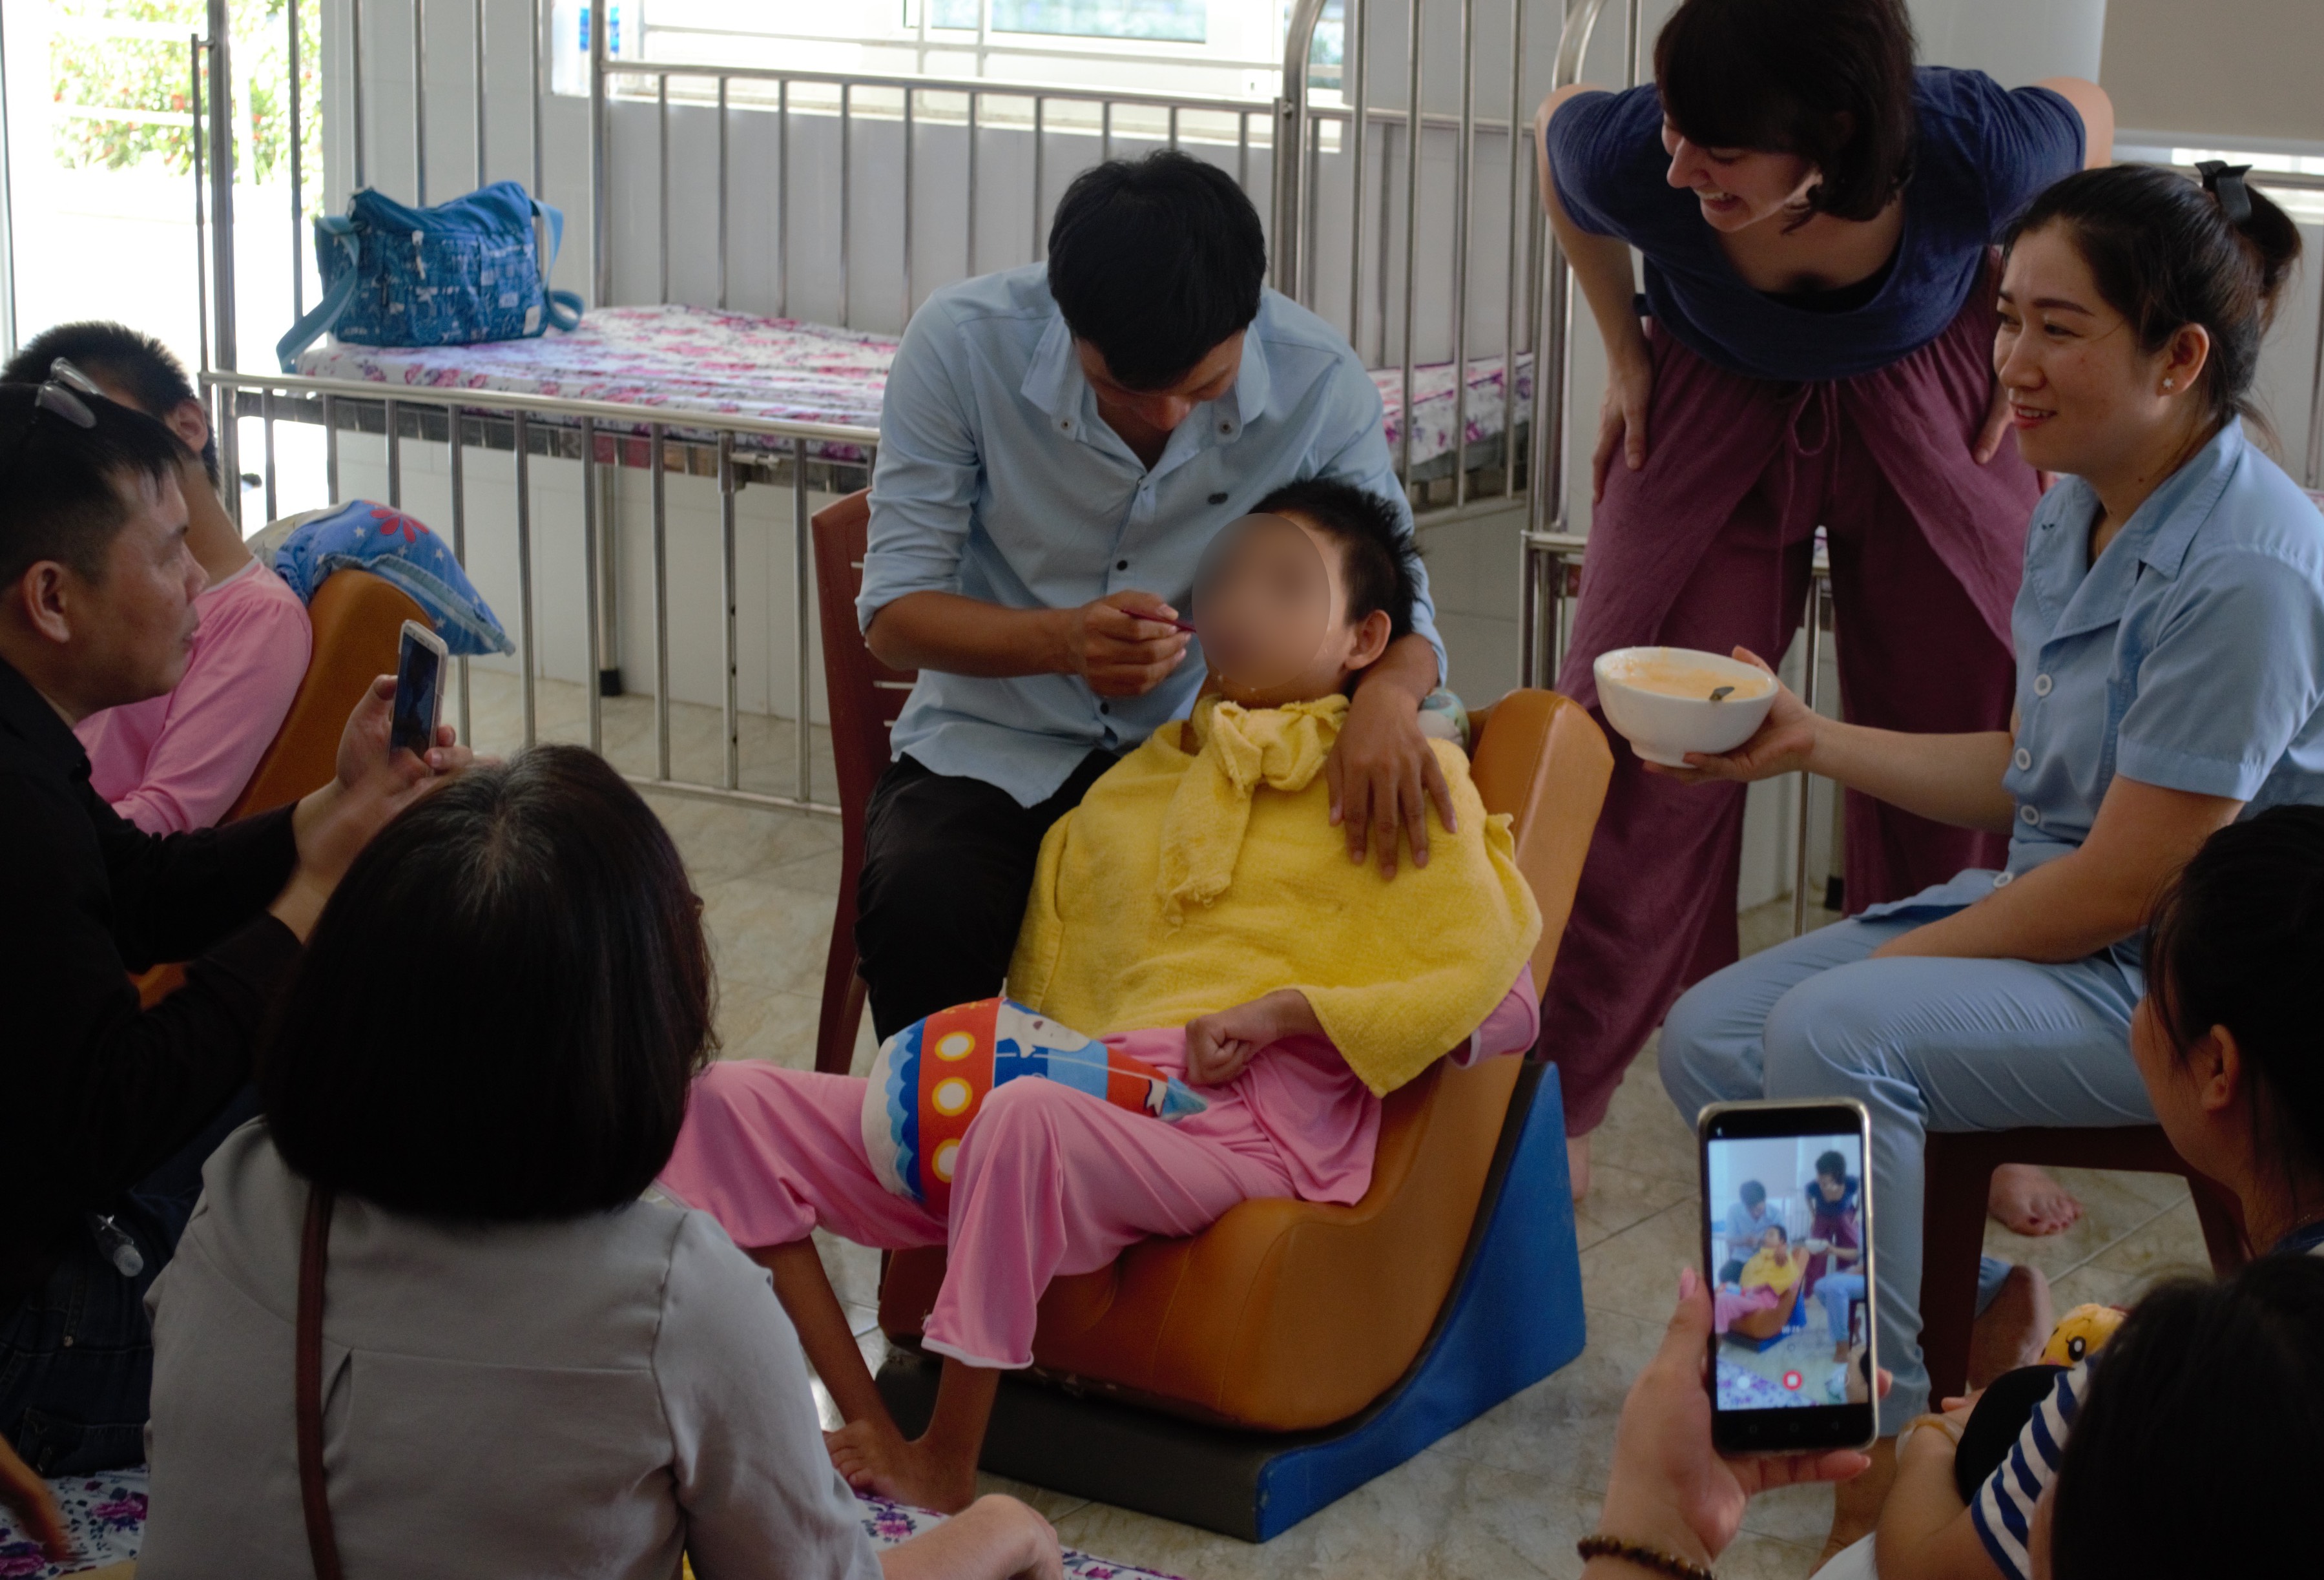 A child with cerebral palsy in Vietnam eats in a semi-reclined position, a new and much safer way for him to eat!